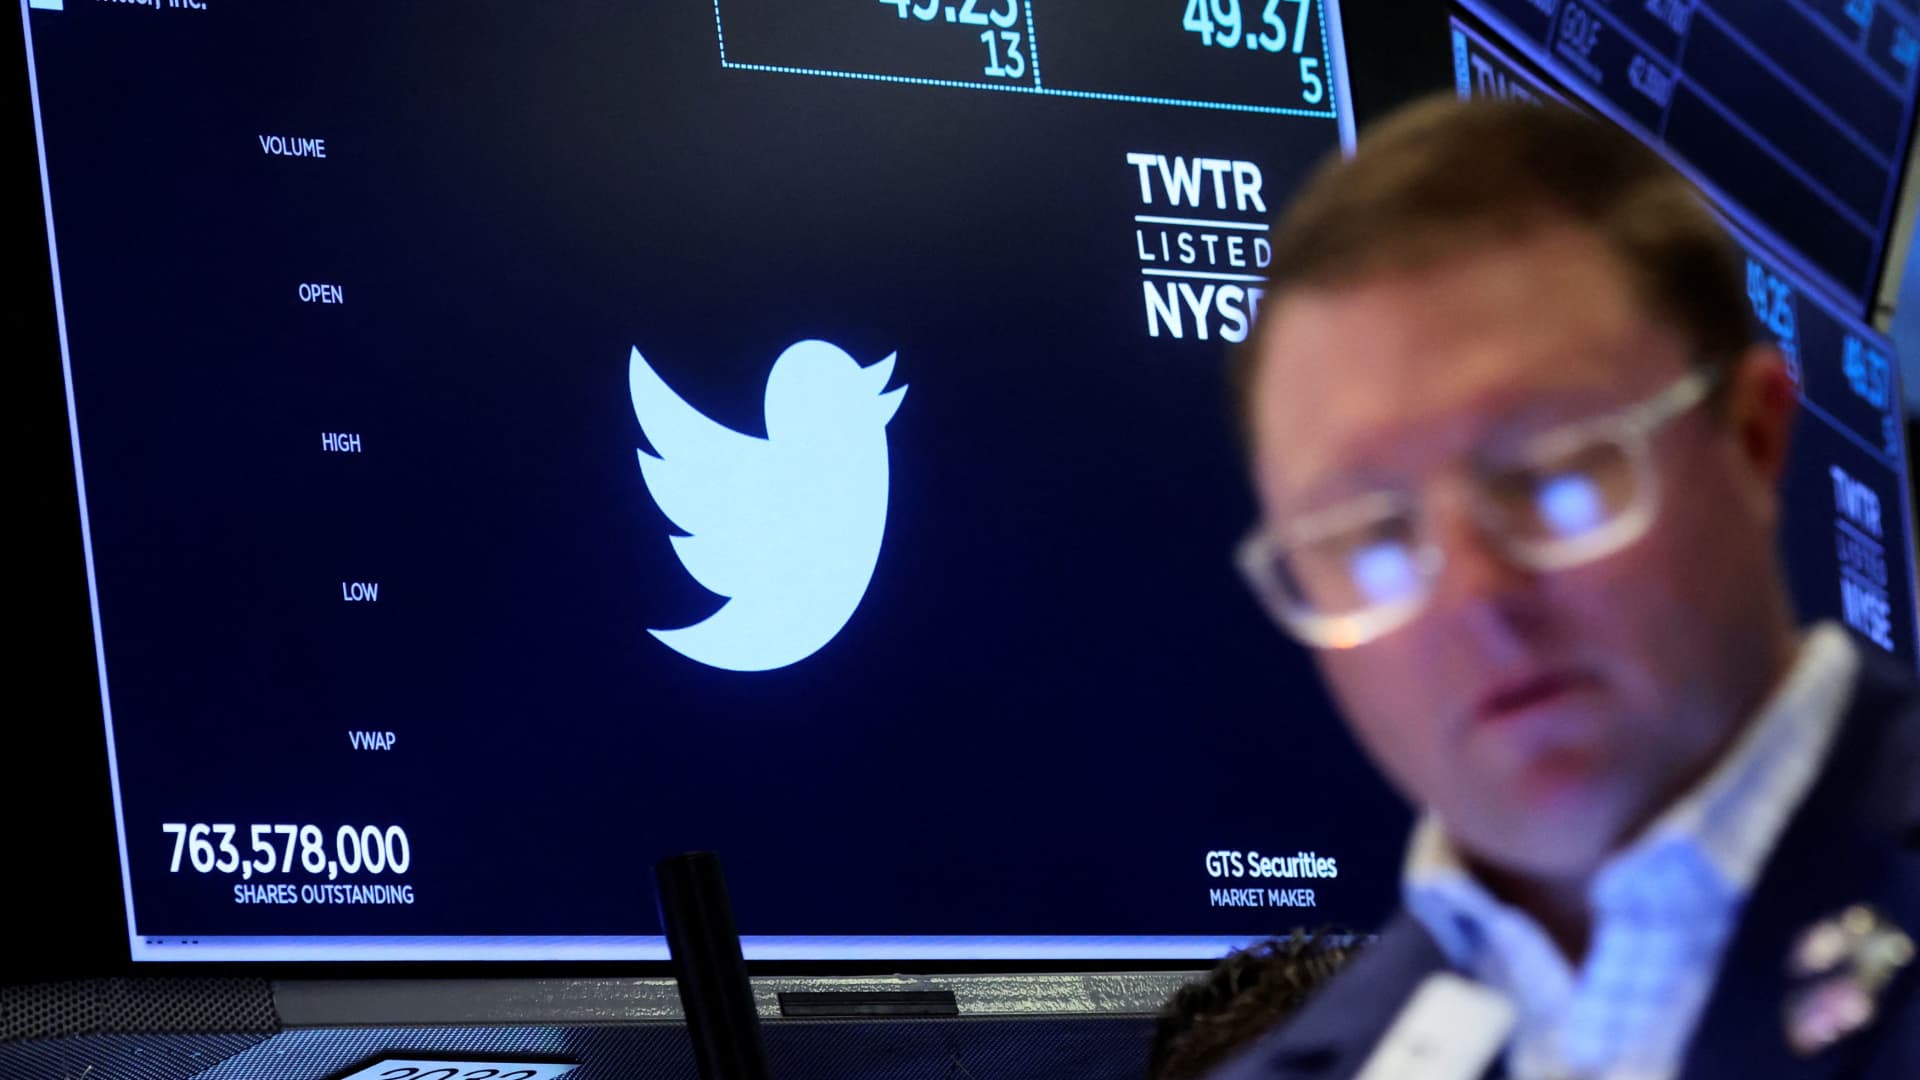 Twitter board urges shareholders to approve sale to Elon Musk in revised proxy filing